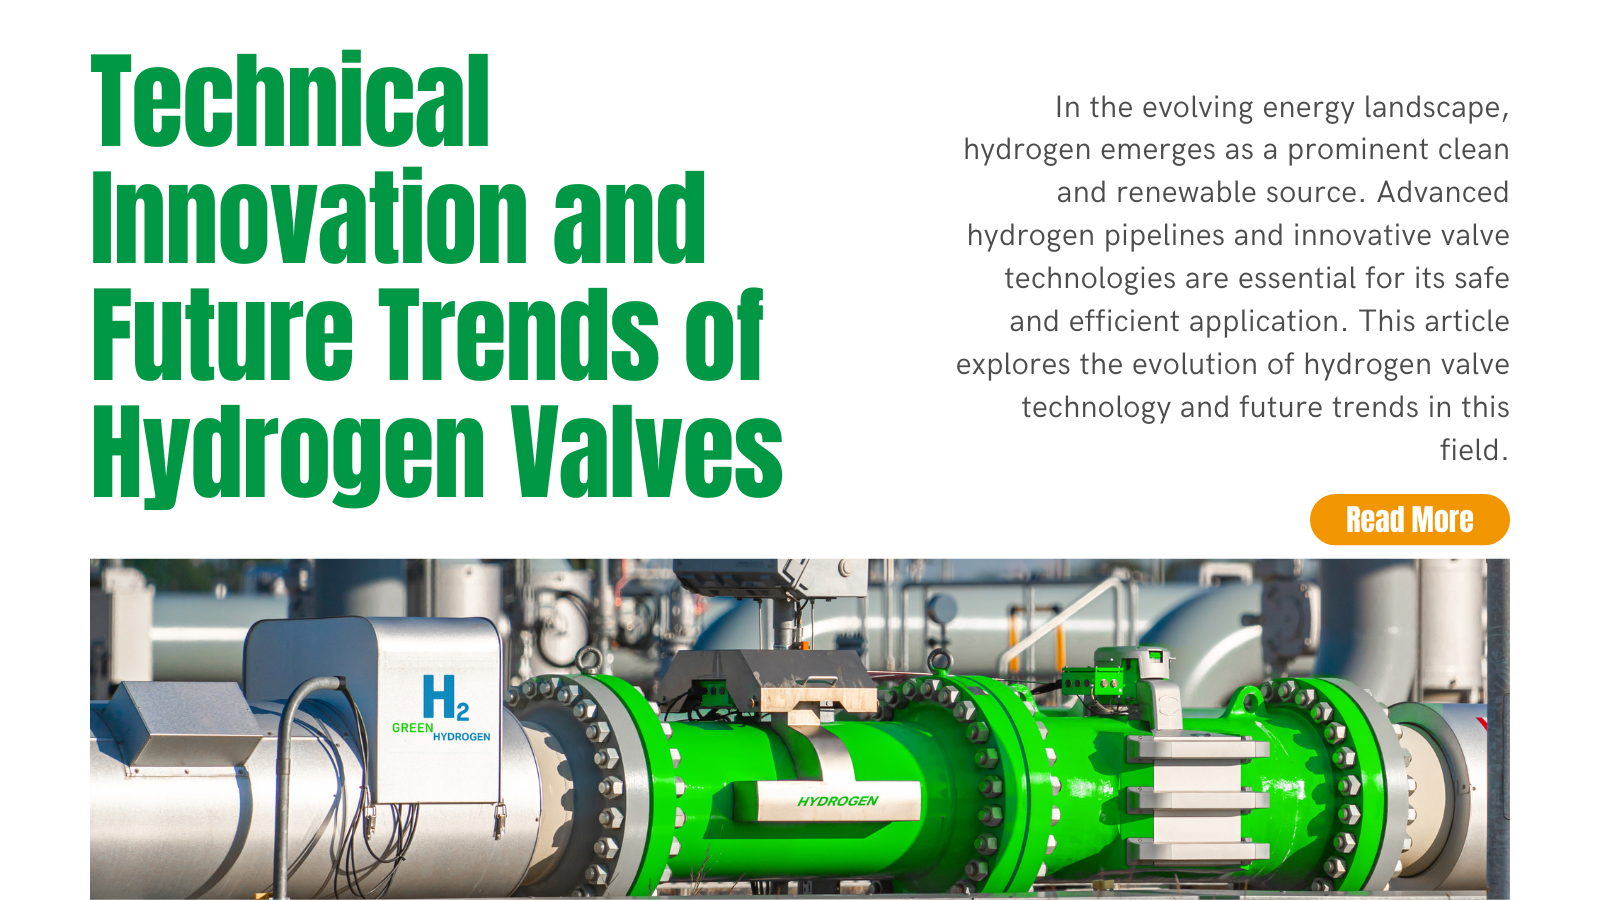 Requirements for Hydrogen Pipelines and Valves (Part 4) - Technical Innovation and Future Trends of Hydrogen Valves | INOX-TEK